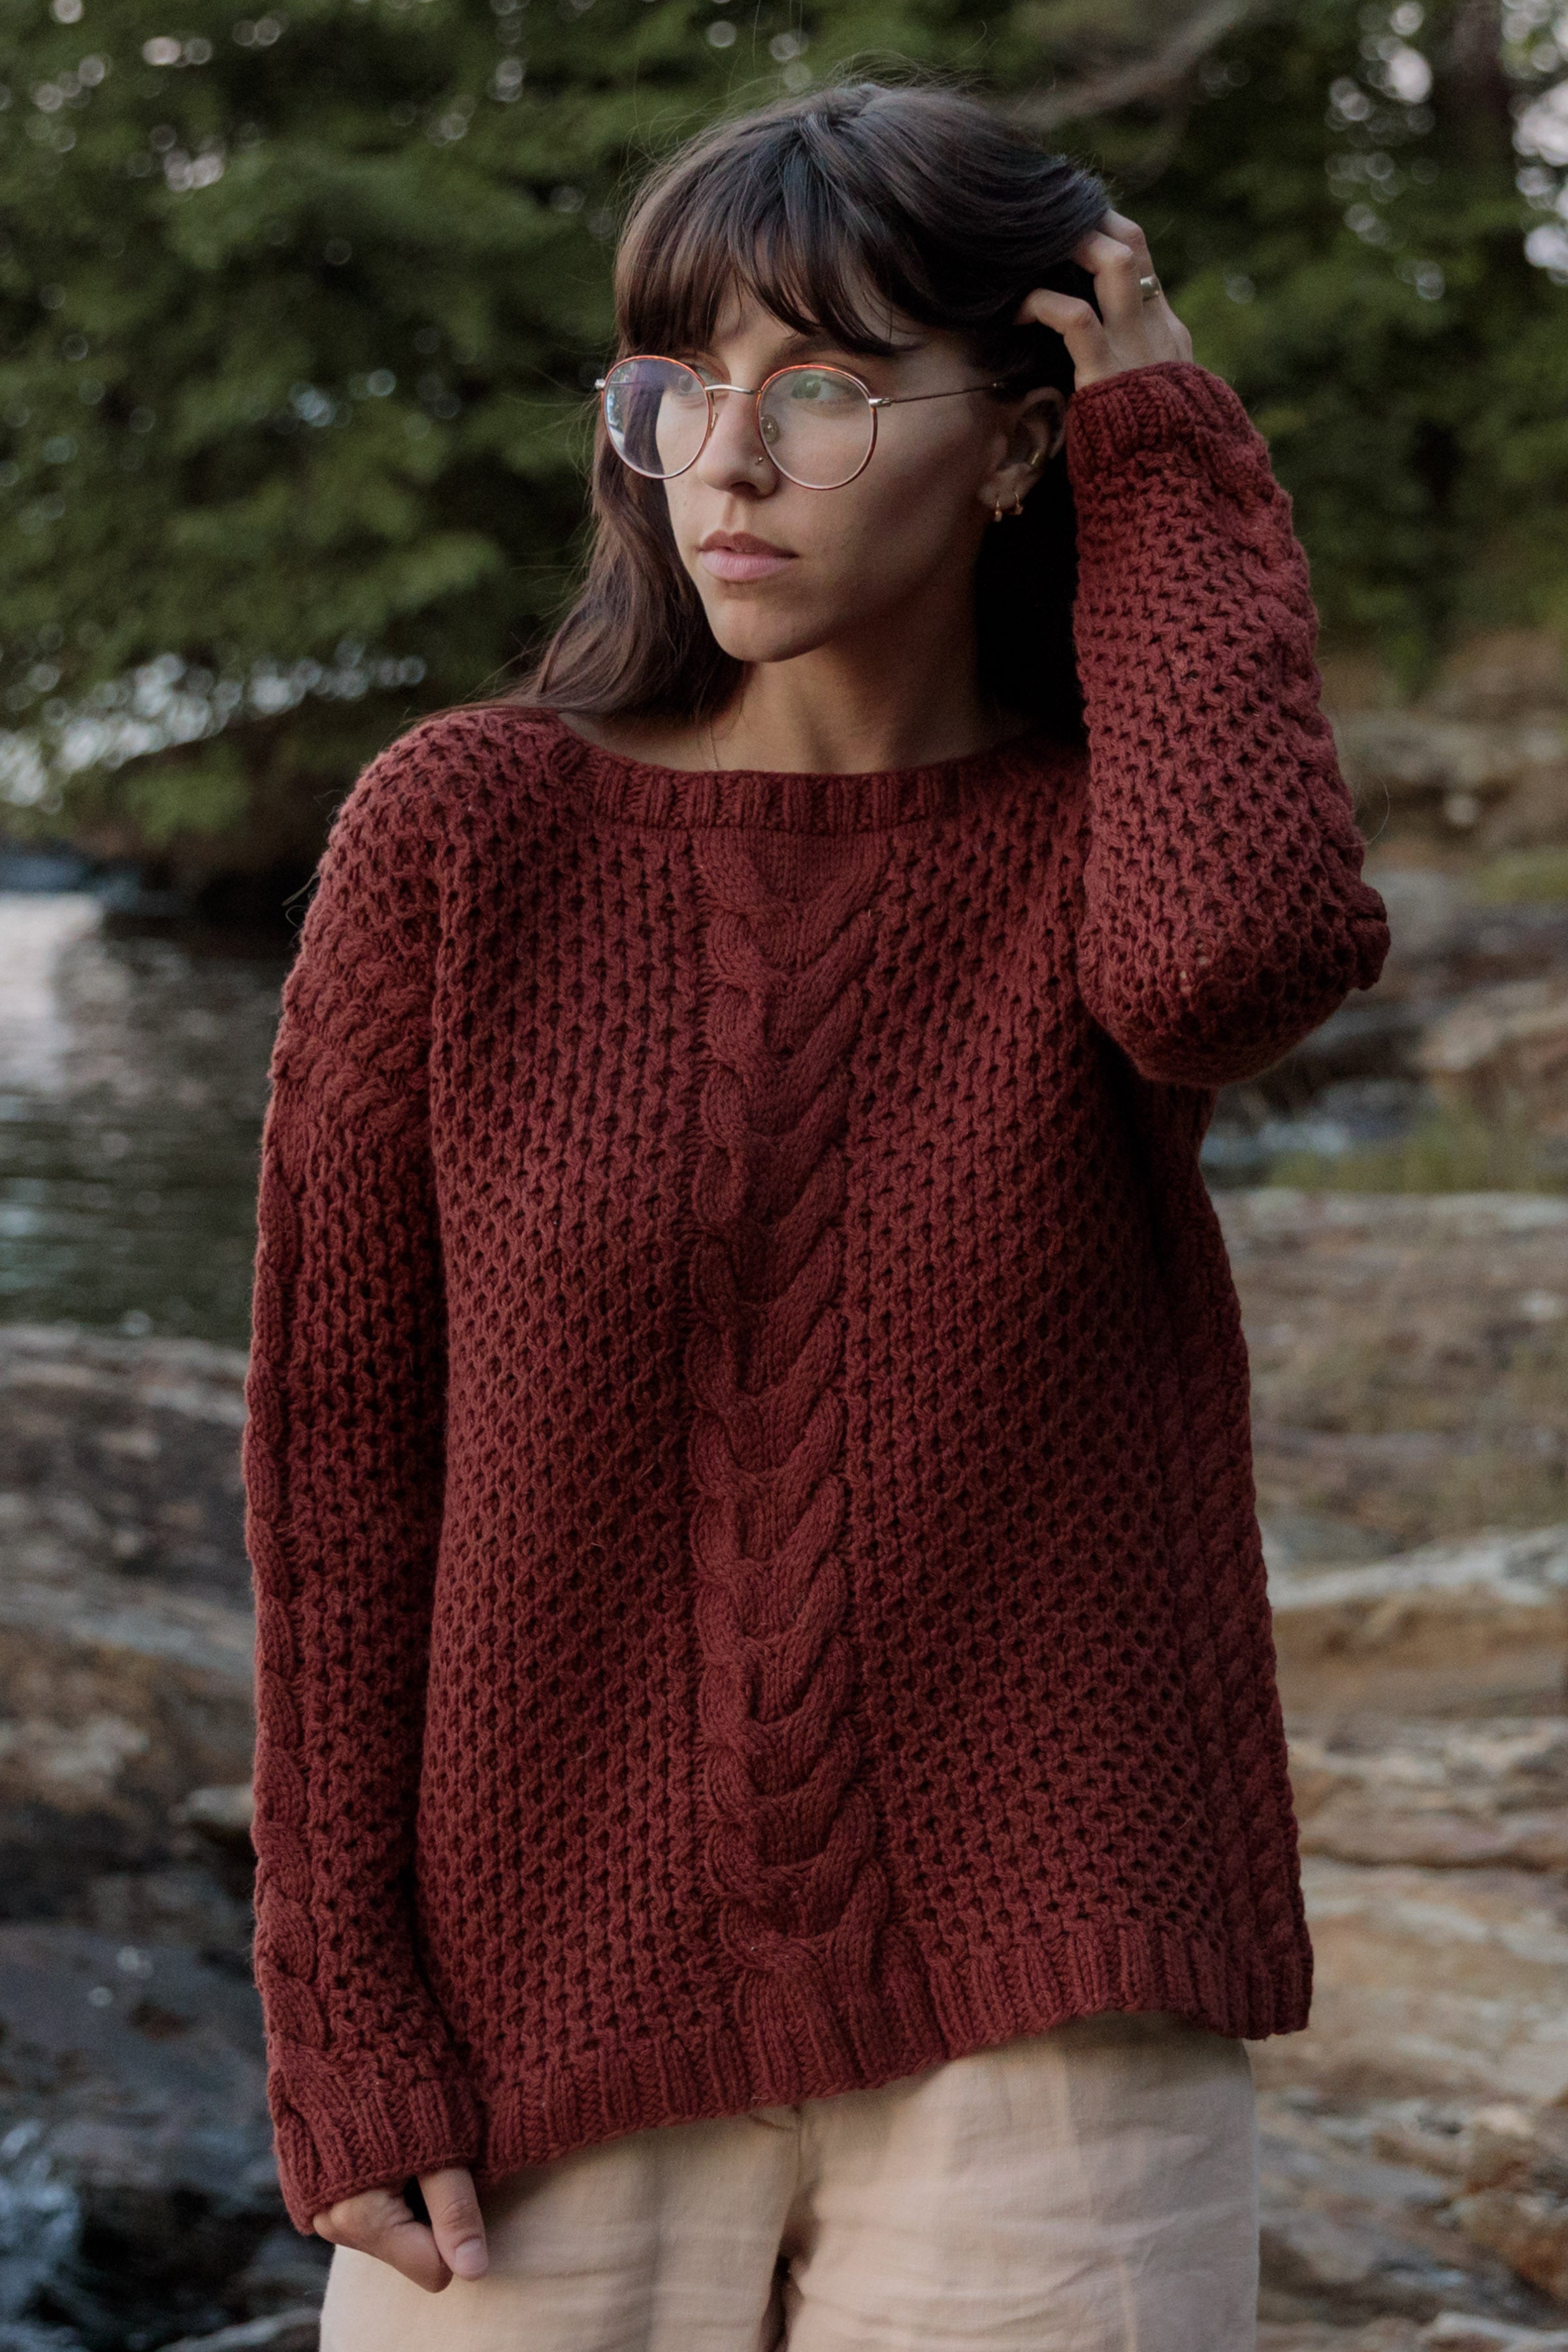 o'dell sweater knitting pattern – Quince & Co.